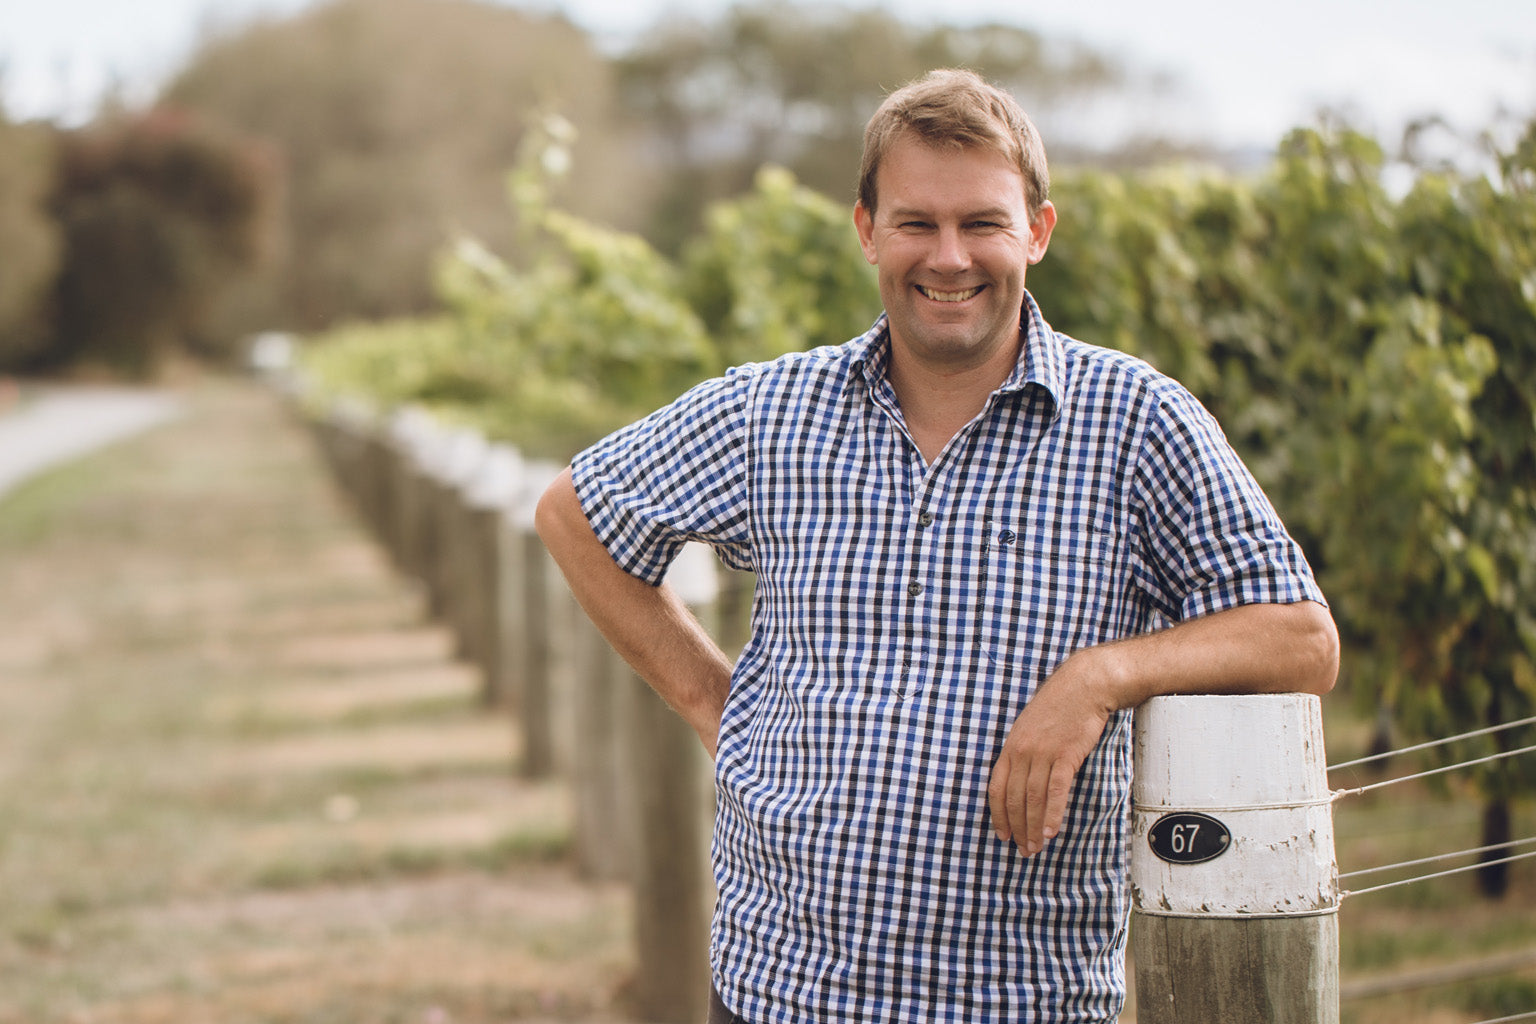 Meet the Makers – Foley Wine Club